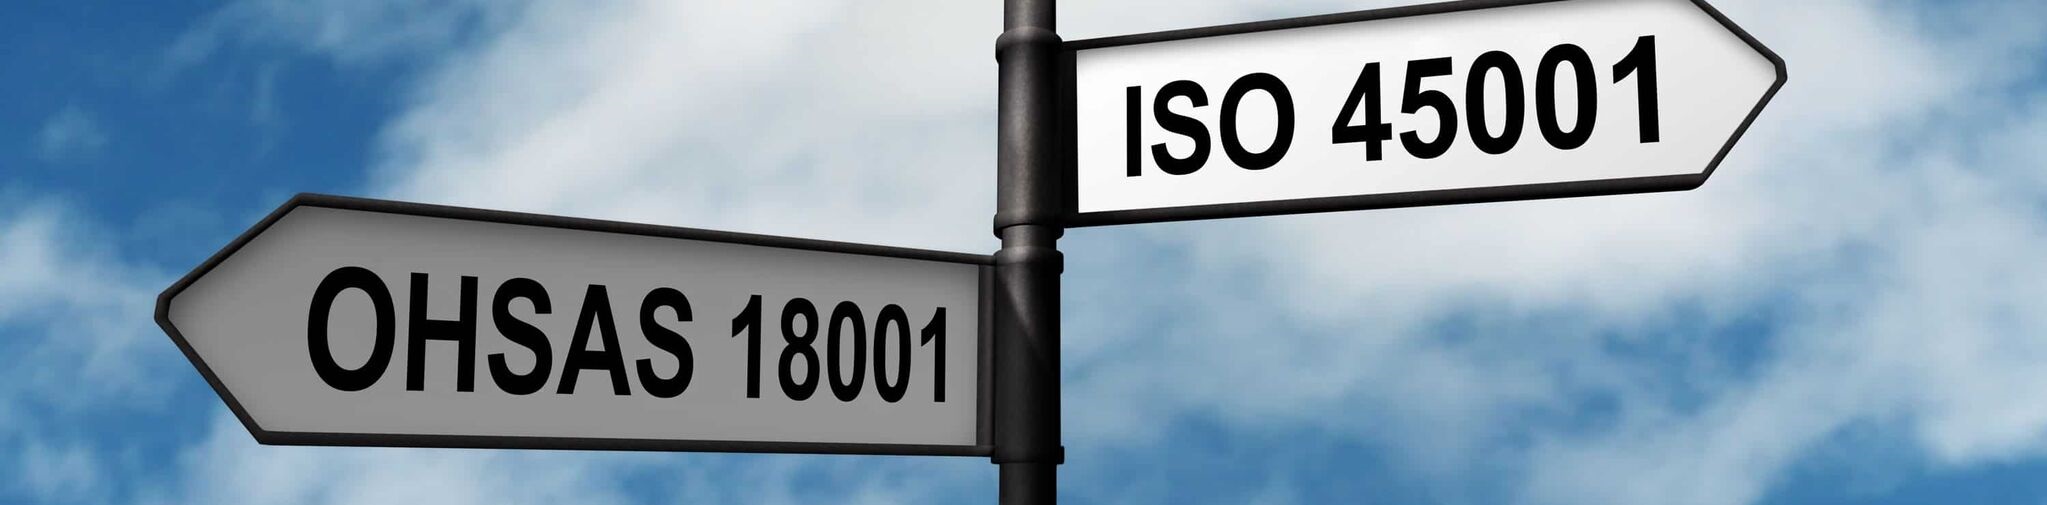 certsolutions-iso18001